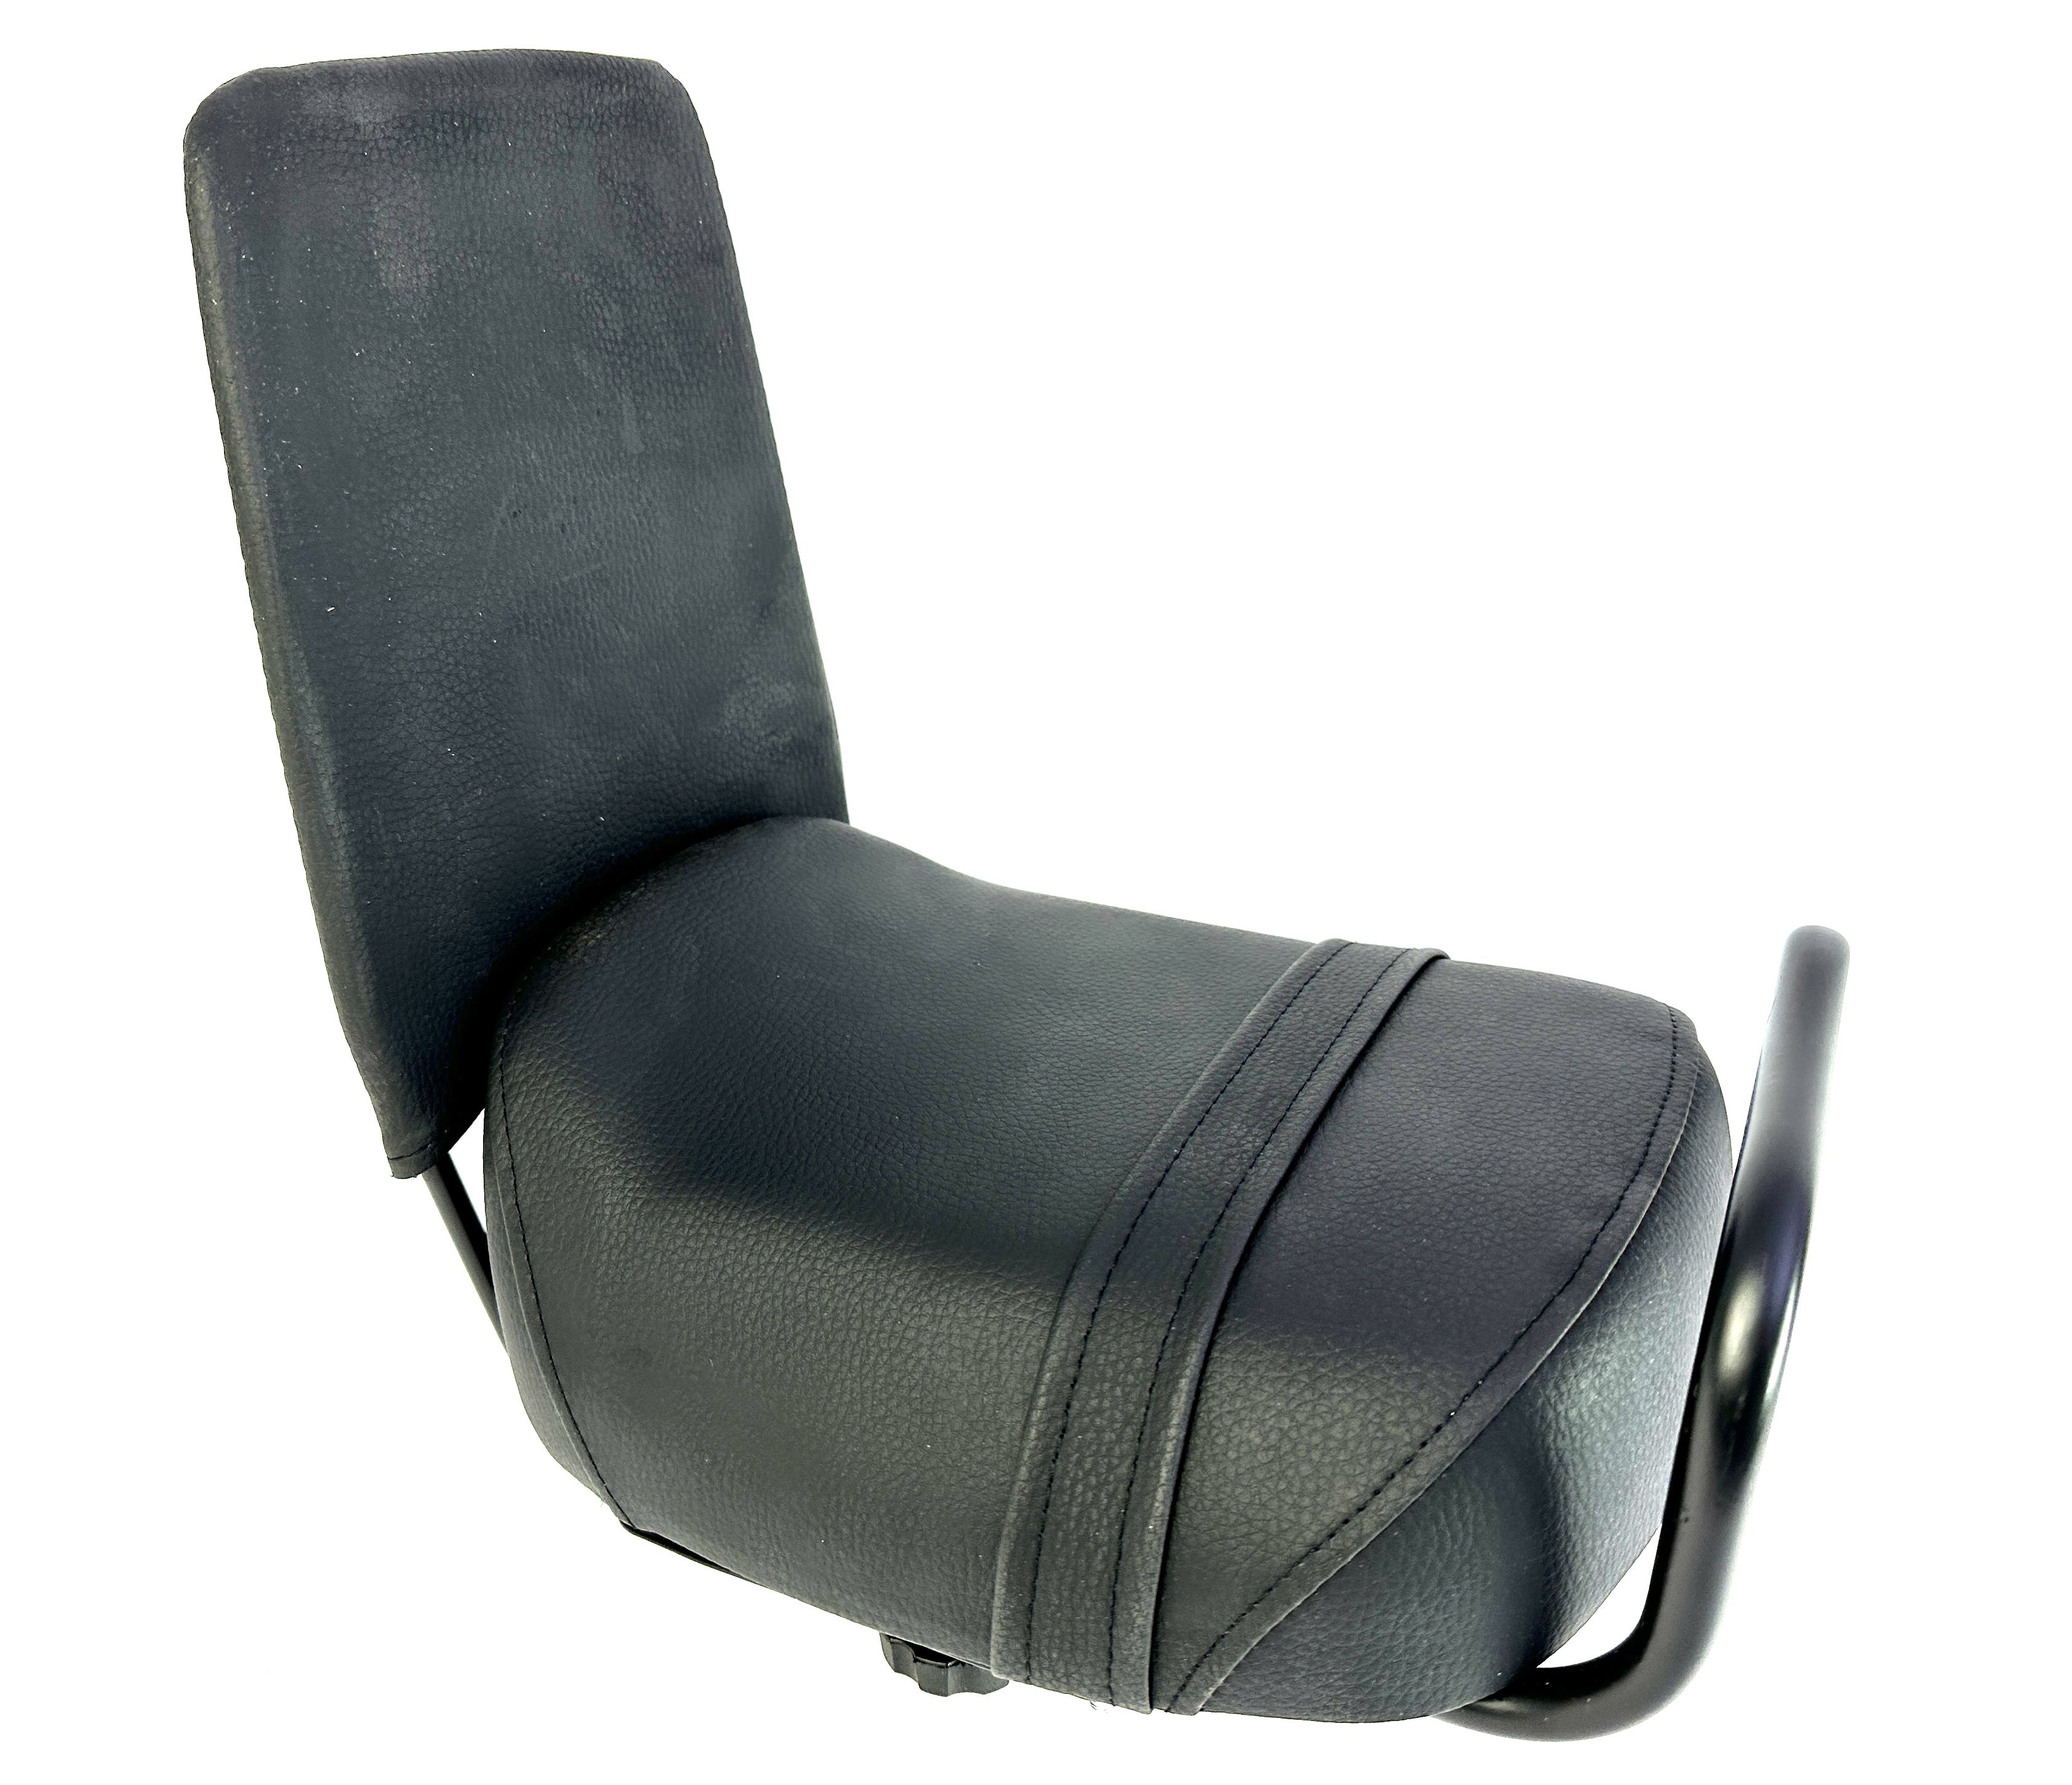 Pillion seat with backrest and support bracket